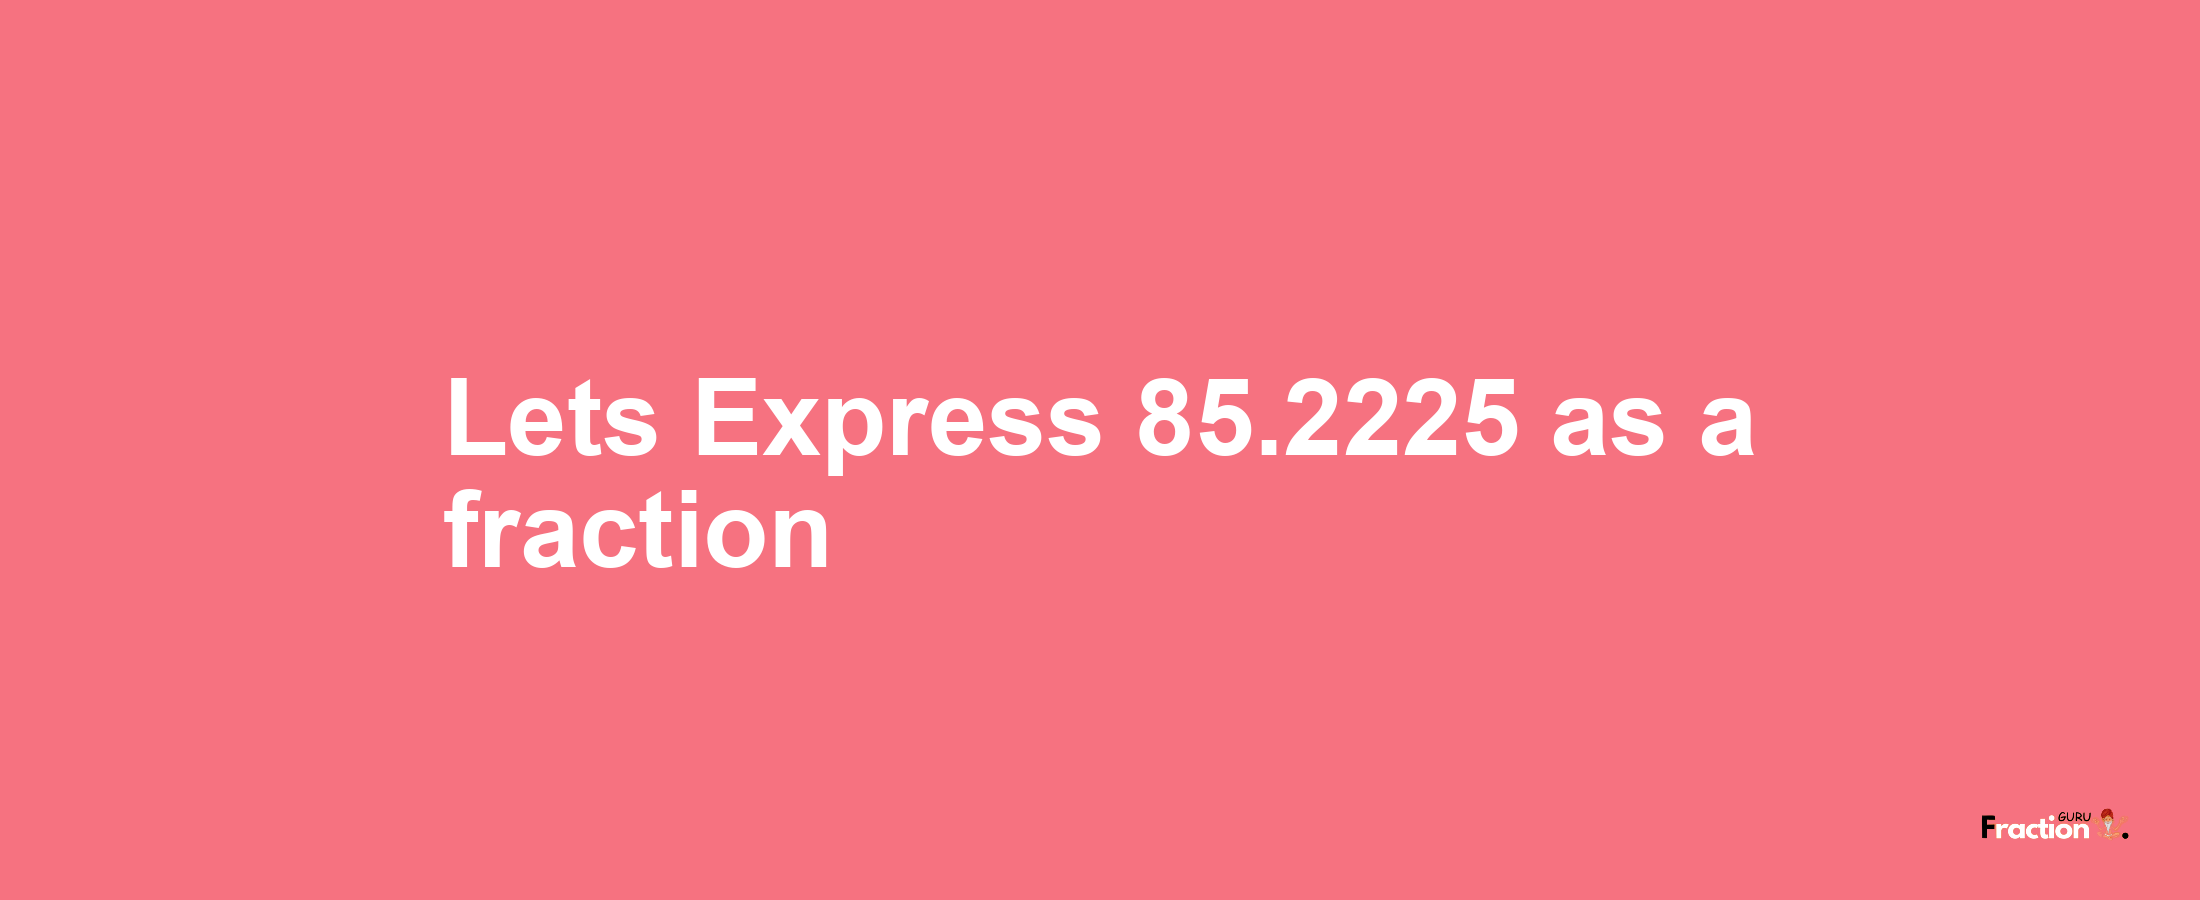 Lets Express 85.2225 as afraction